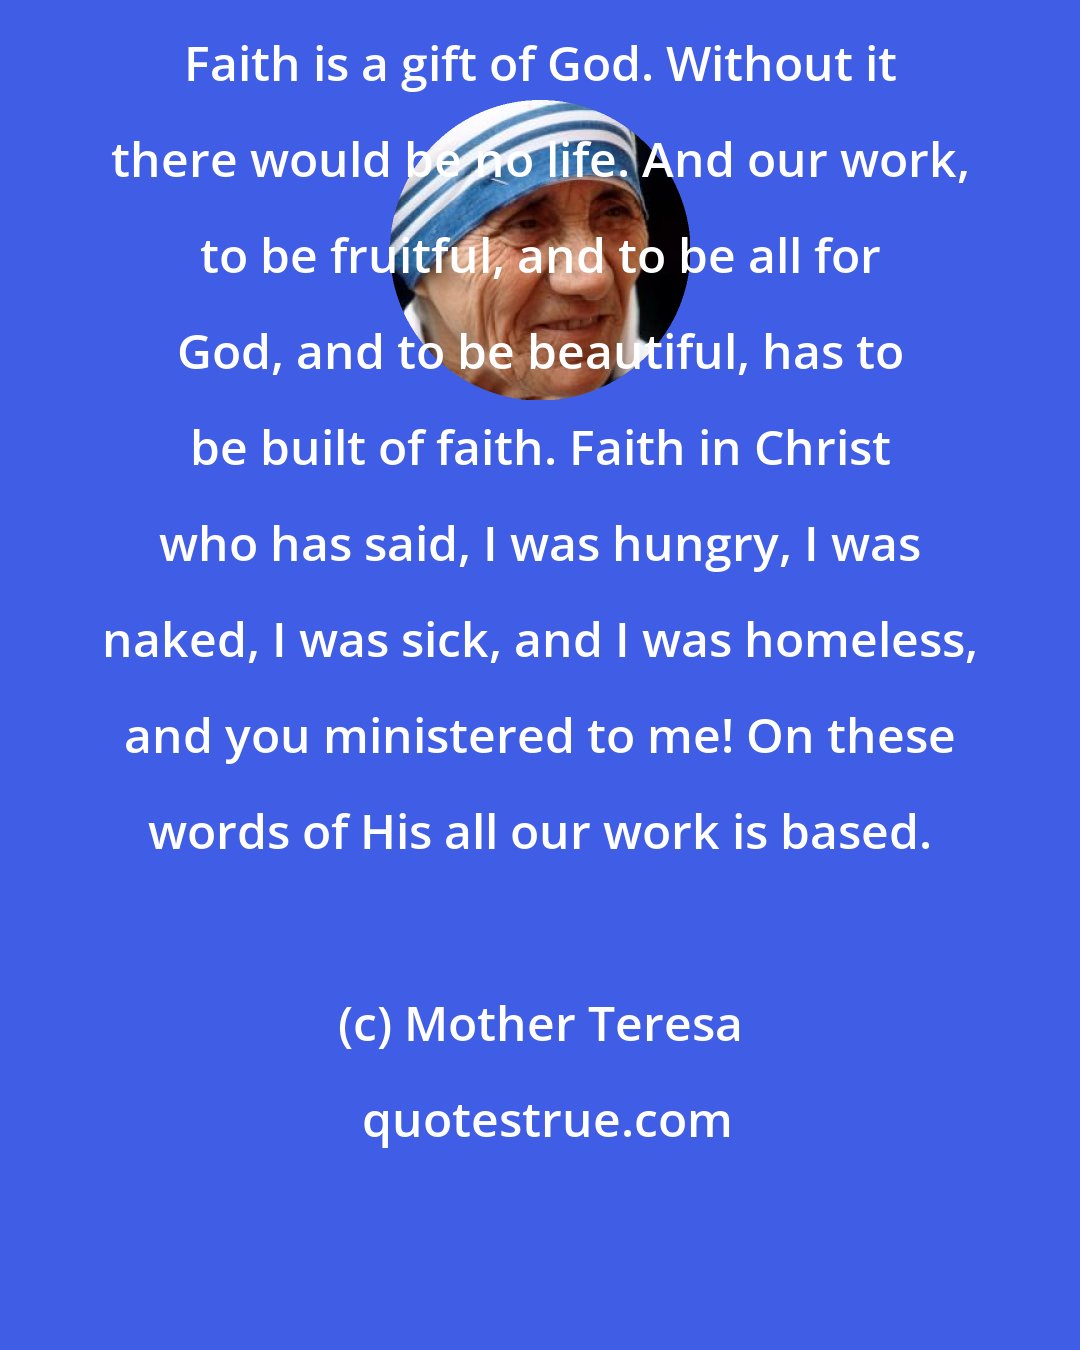 Mother Teresa: Faith is a gift of God. Without it there would be no life. And our work, to be fruitful, and to be all for God, and to be beautiful, has to be built of faith. Faith in Christ who has said, I was hungry, I was naked, I was sick, and I was homeless, and you ministered to me! On these words of His all our work is based.